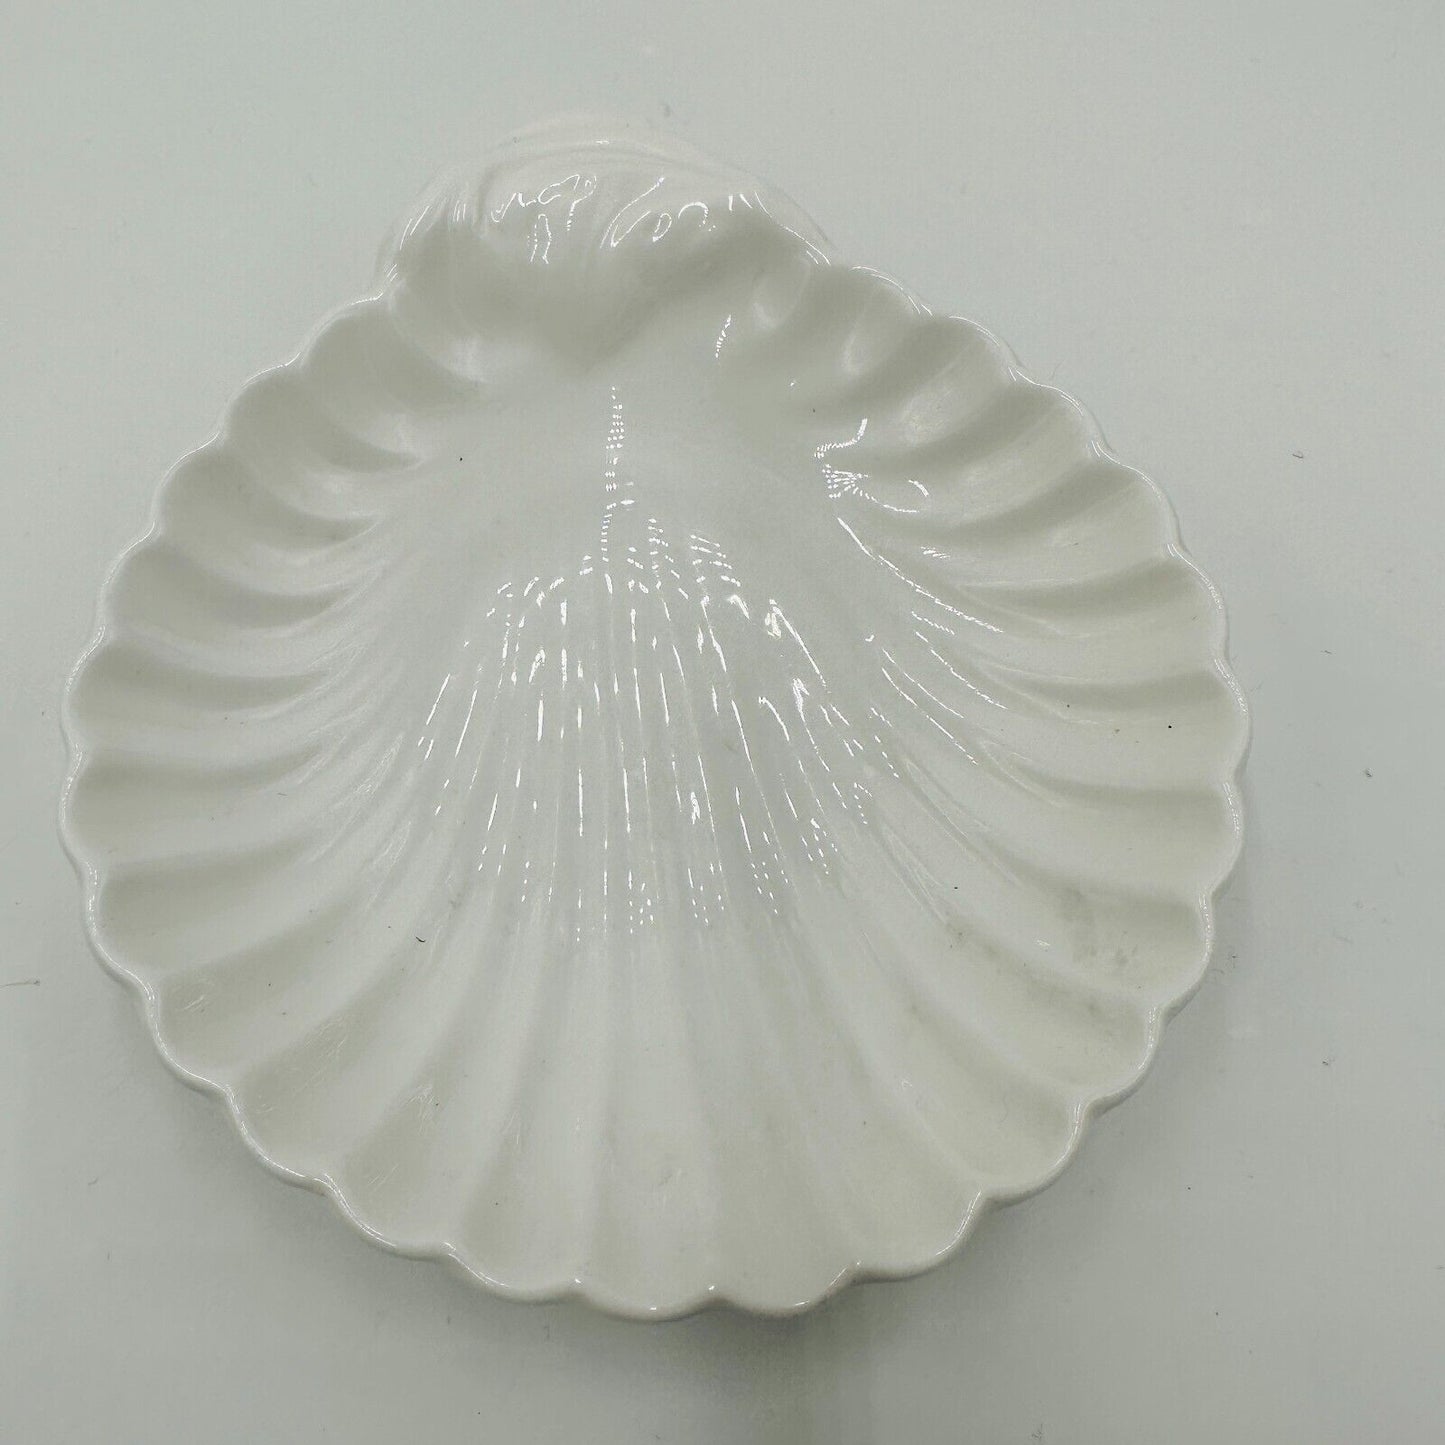 Spode Butter Dish Imperial Fancies Sea Shell Serving Plate-England Soap Copeland